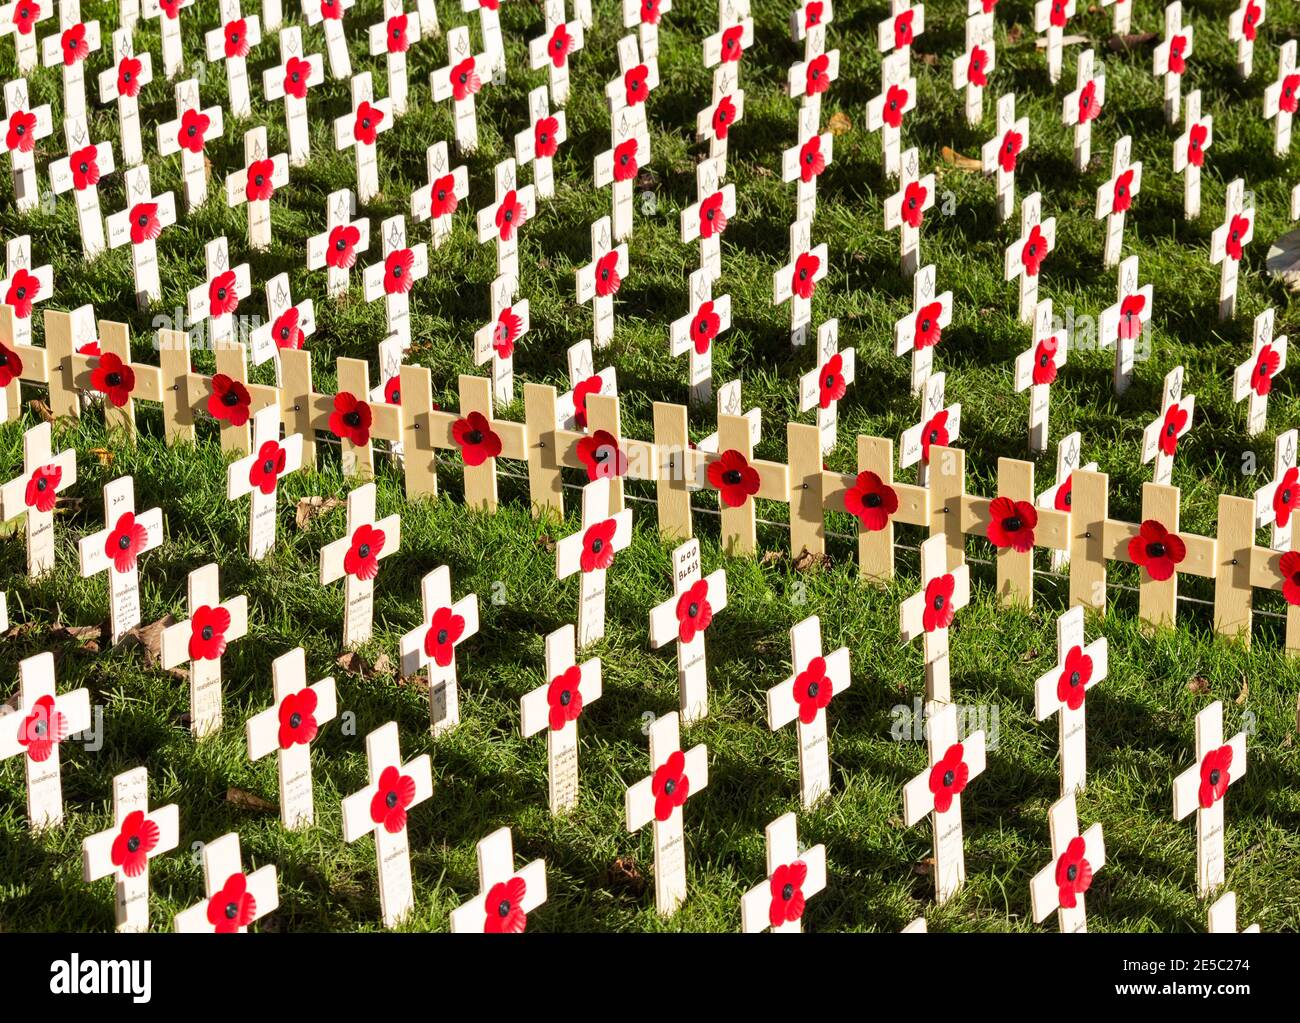 Poppies on wooden crosses. Poppy appeal Remembrance Day UK Stock Photo